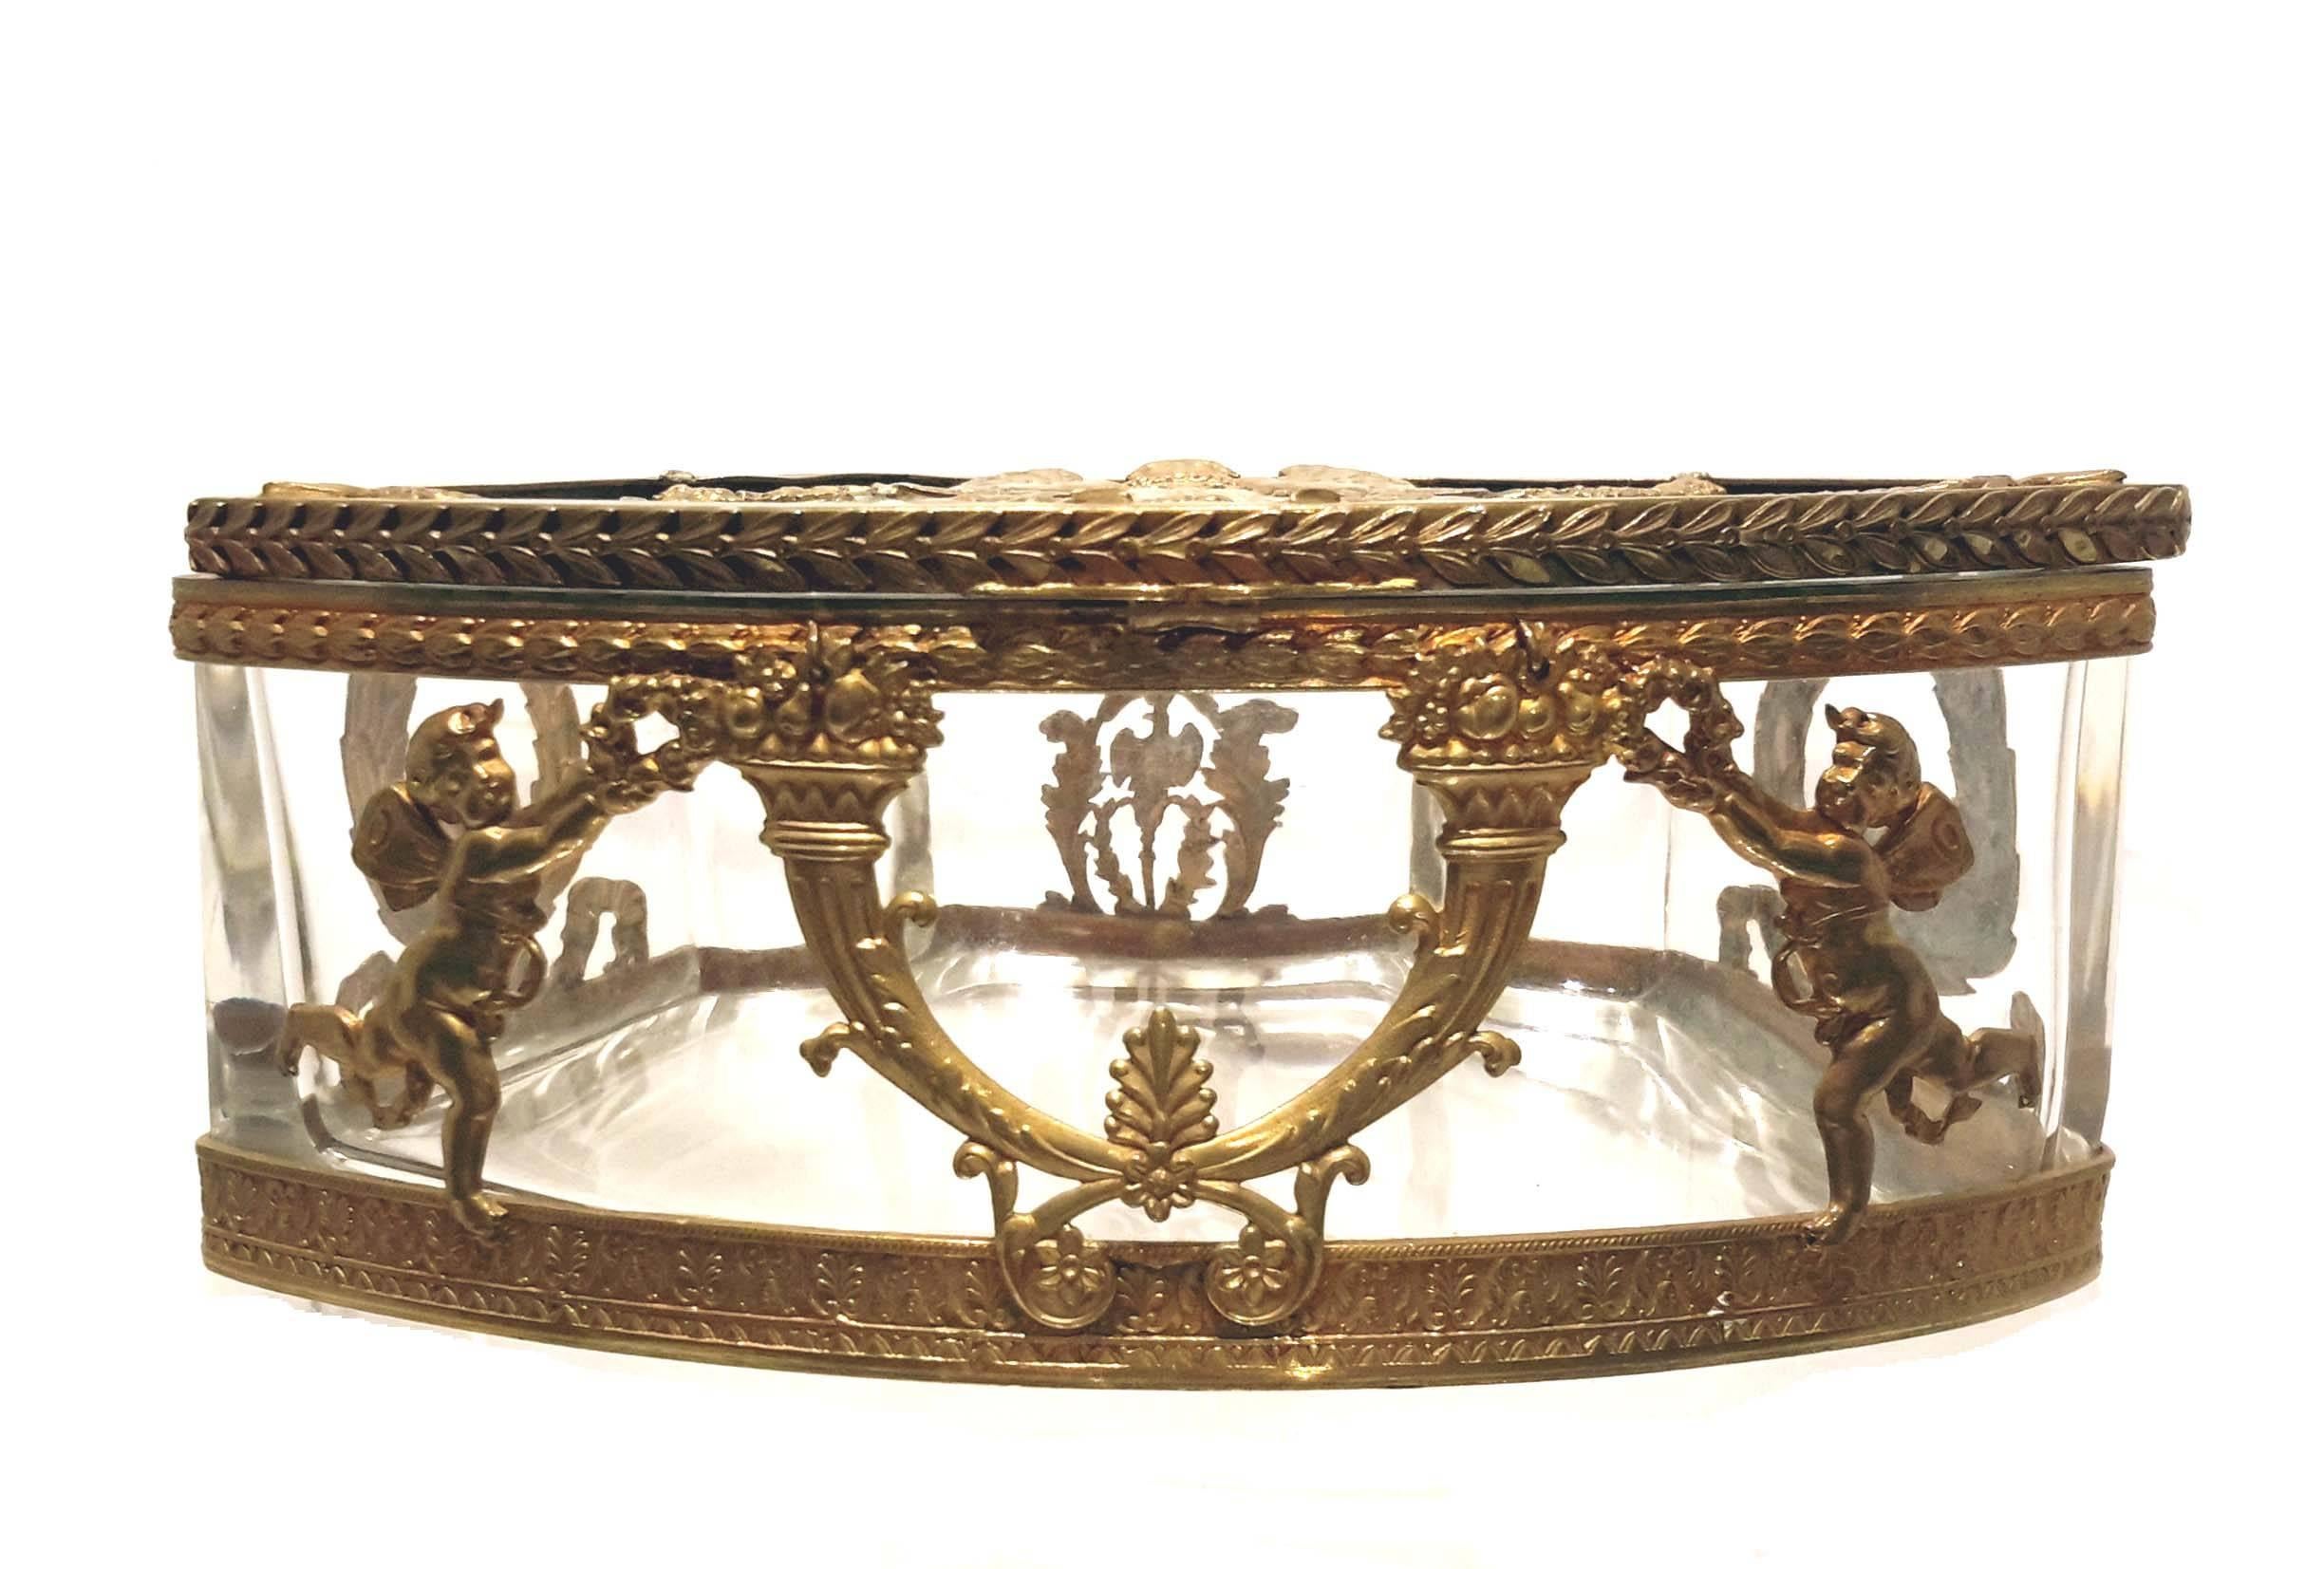 Ormolu-mounted French crystal jewelry box/ casket in Empire style, circa 1900. Beautifully decorated with bronze mounting.